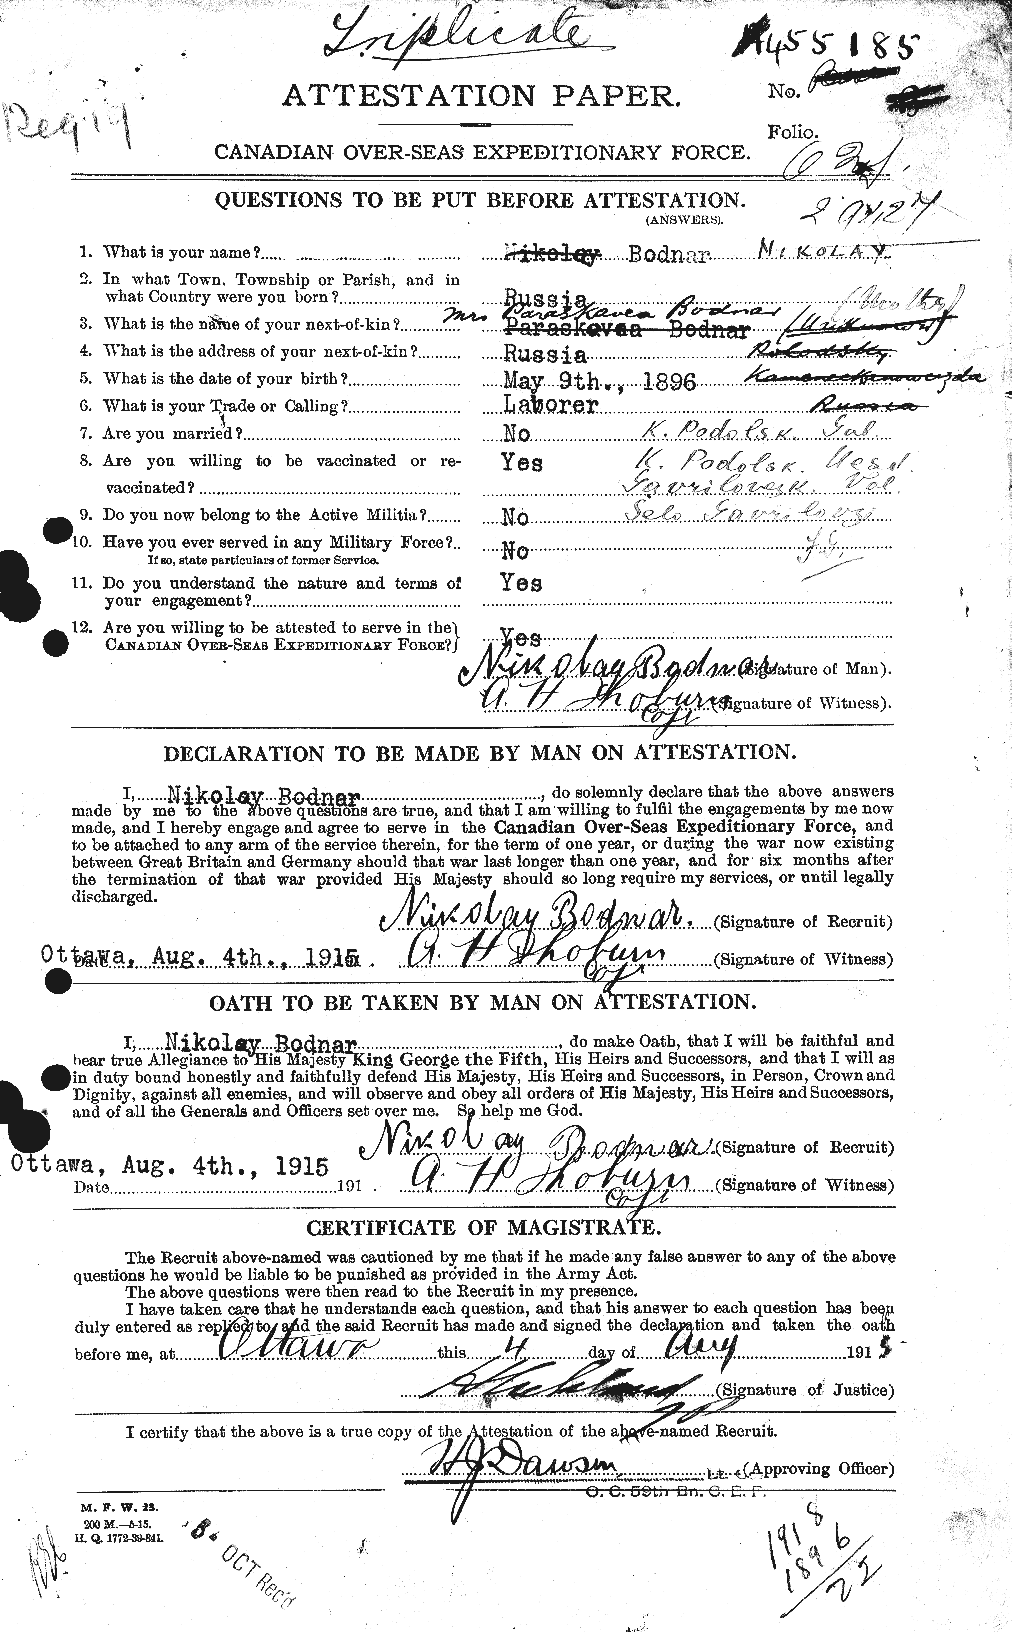 Personnel Records of the First World War - CEF 245140a